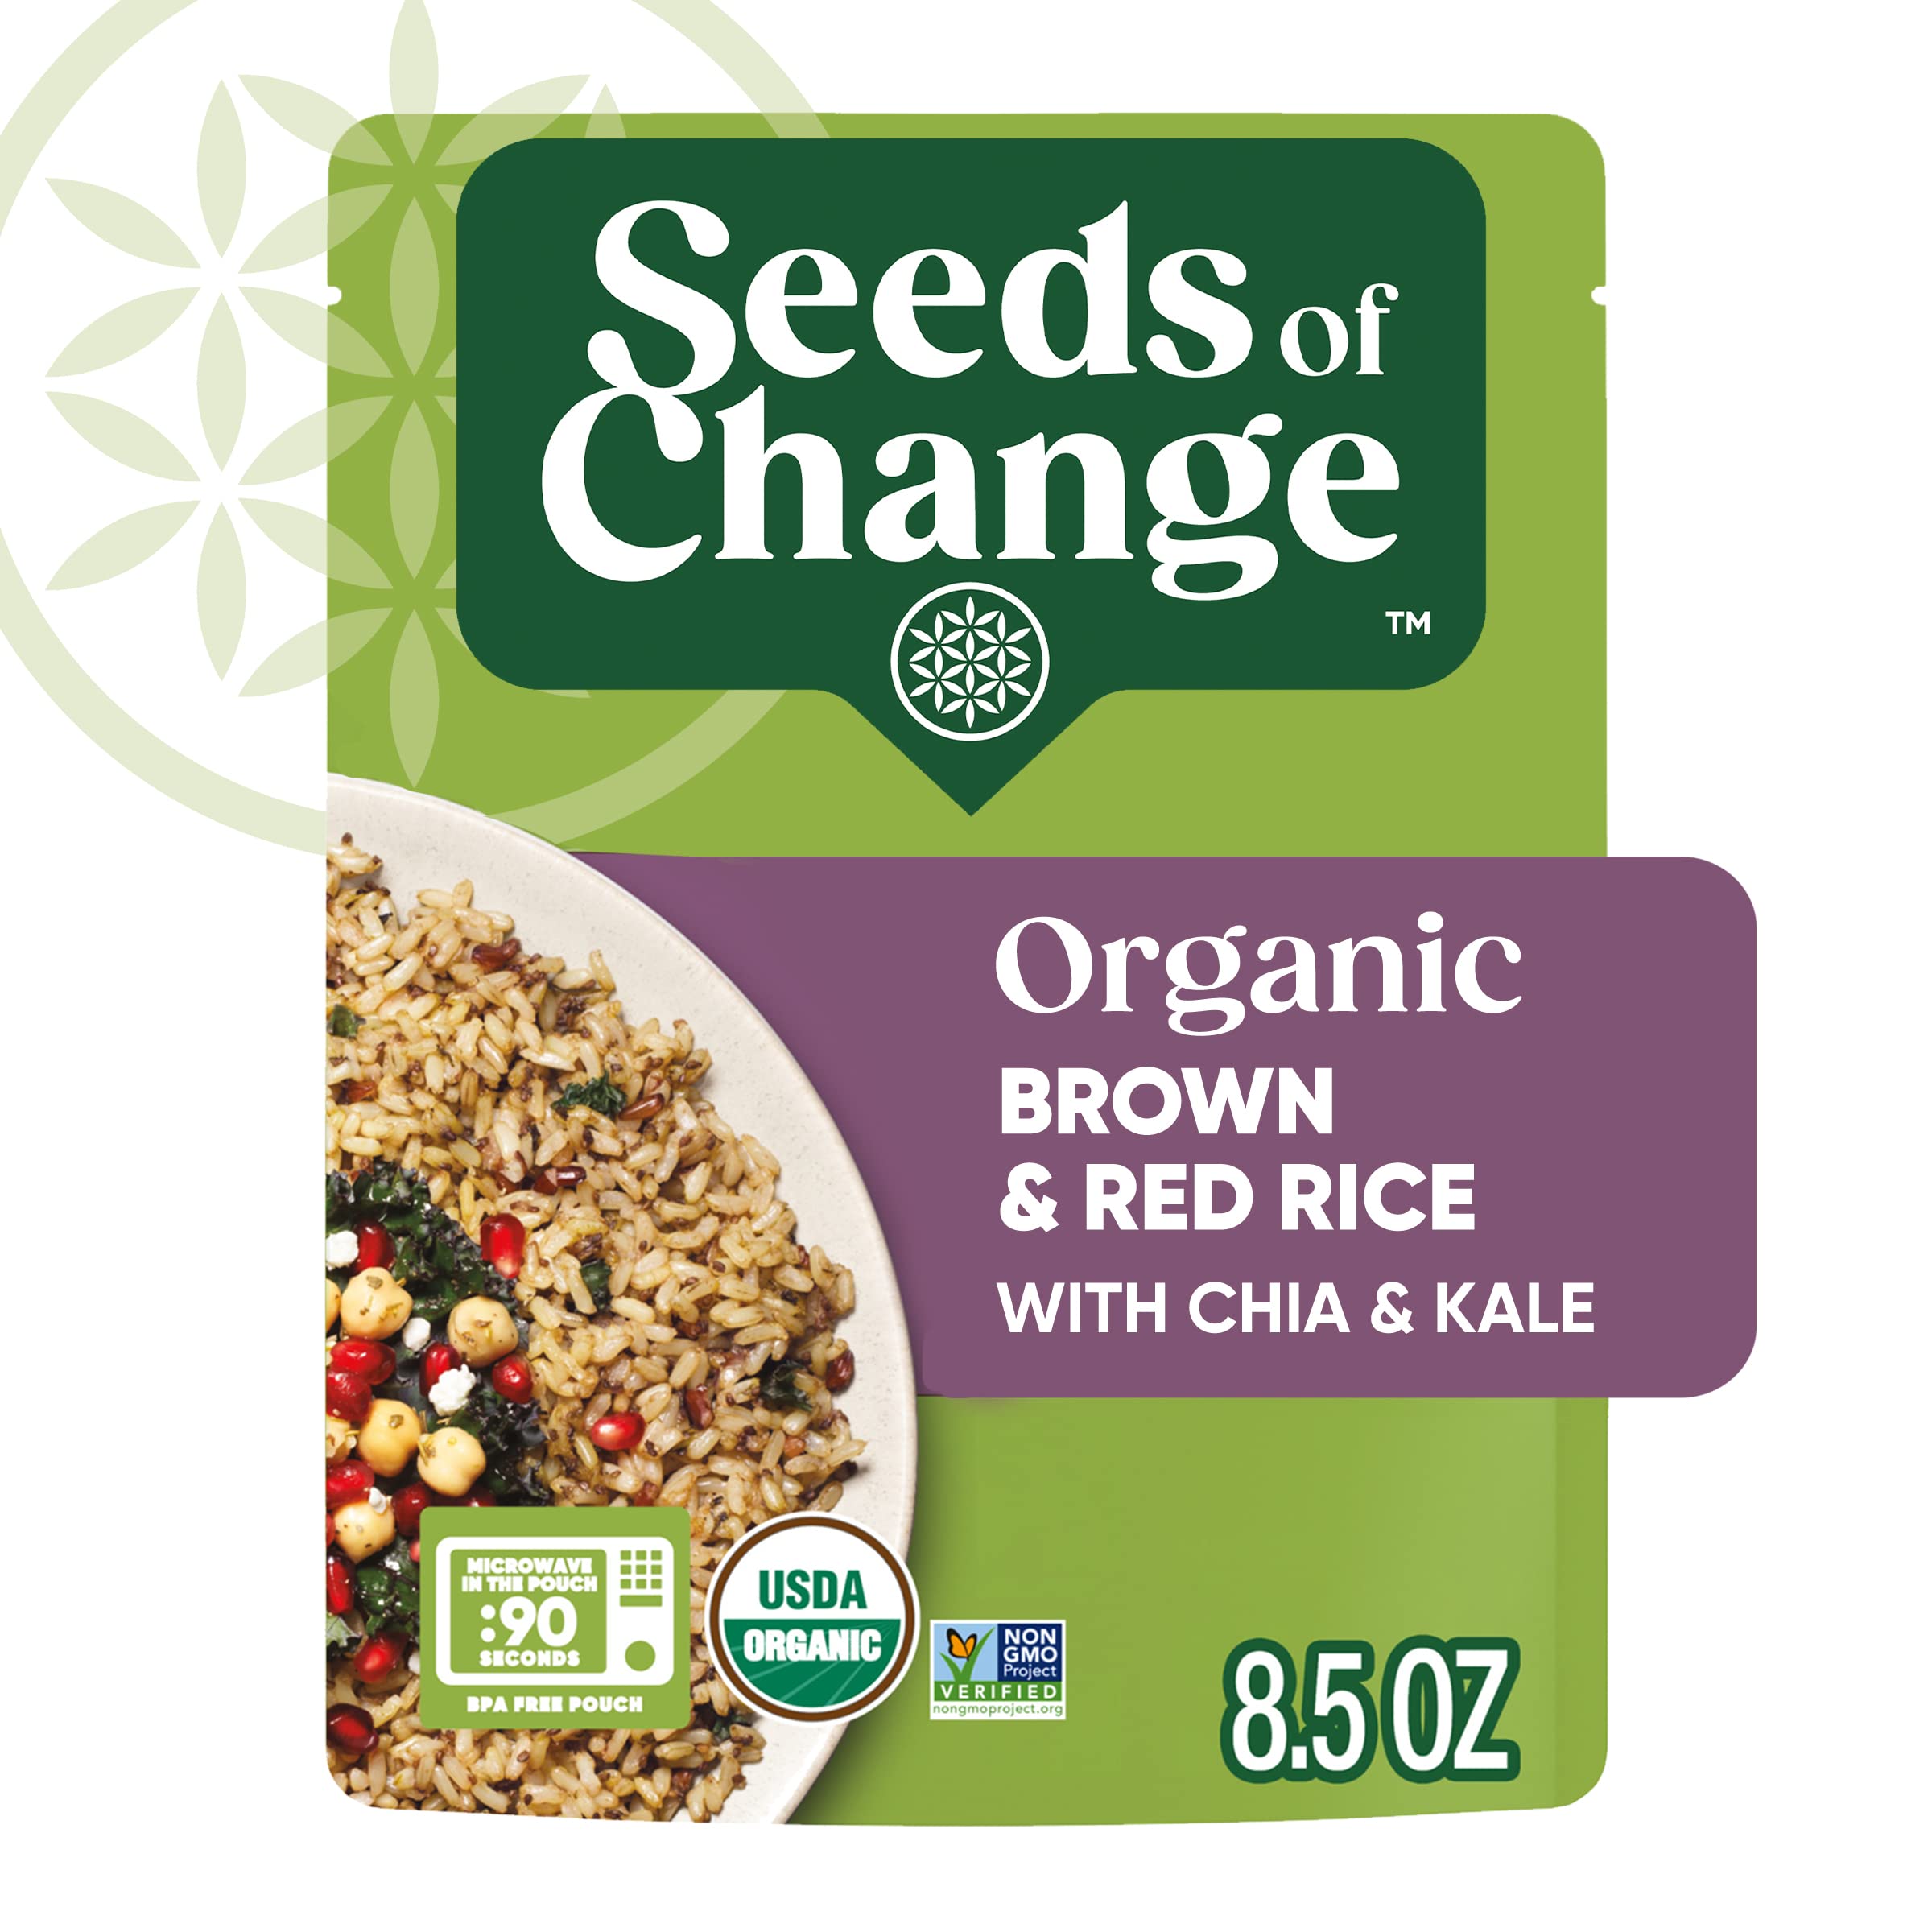 12-Count Organic Brown & Red Rice w/ Chia & Kale, Seeds of Change, 8.5-Oz per pouch,  $13.33 w/ 15% S&S